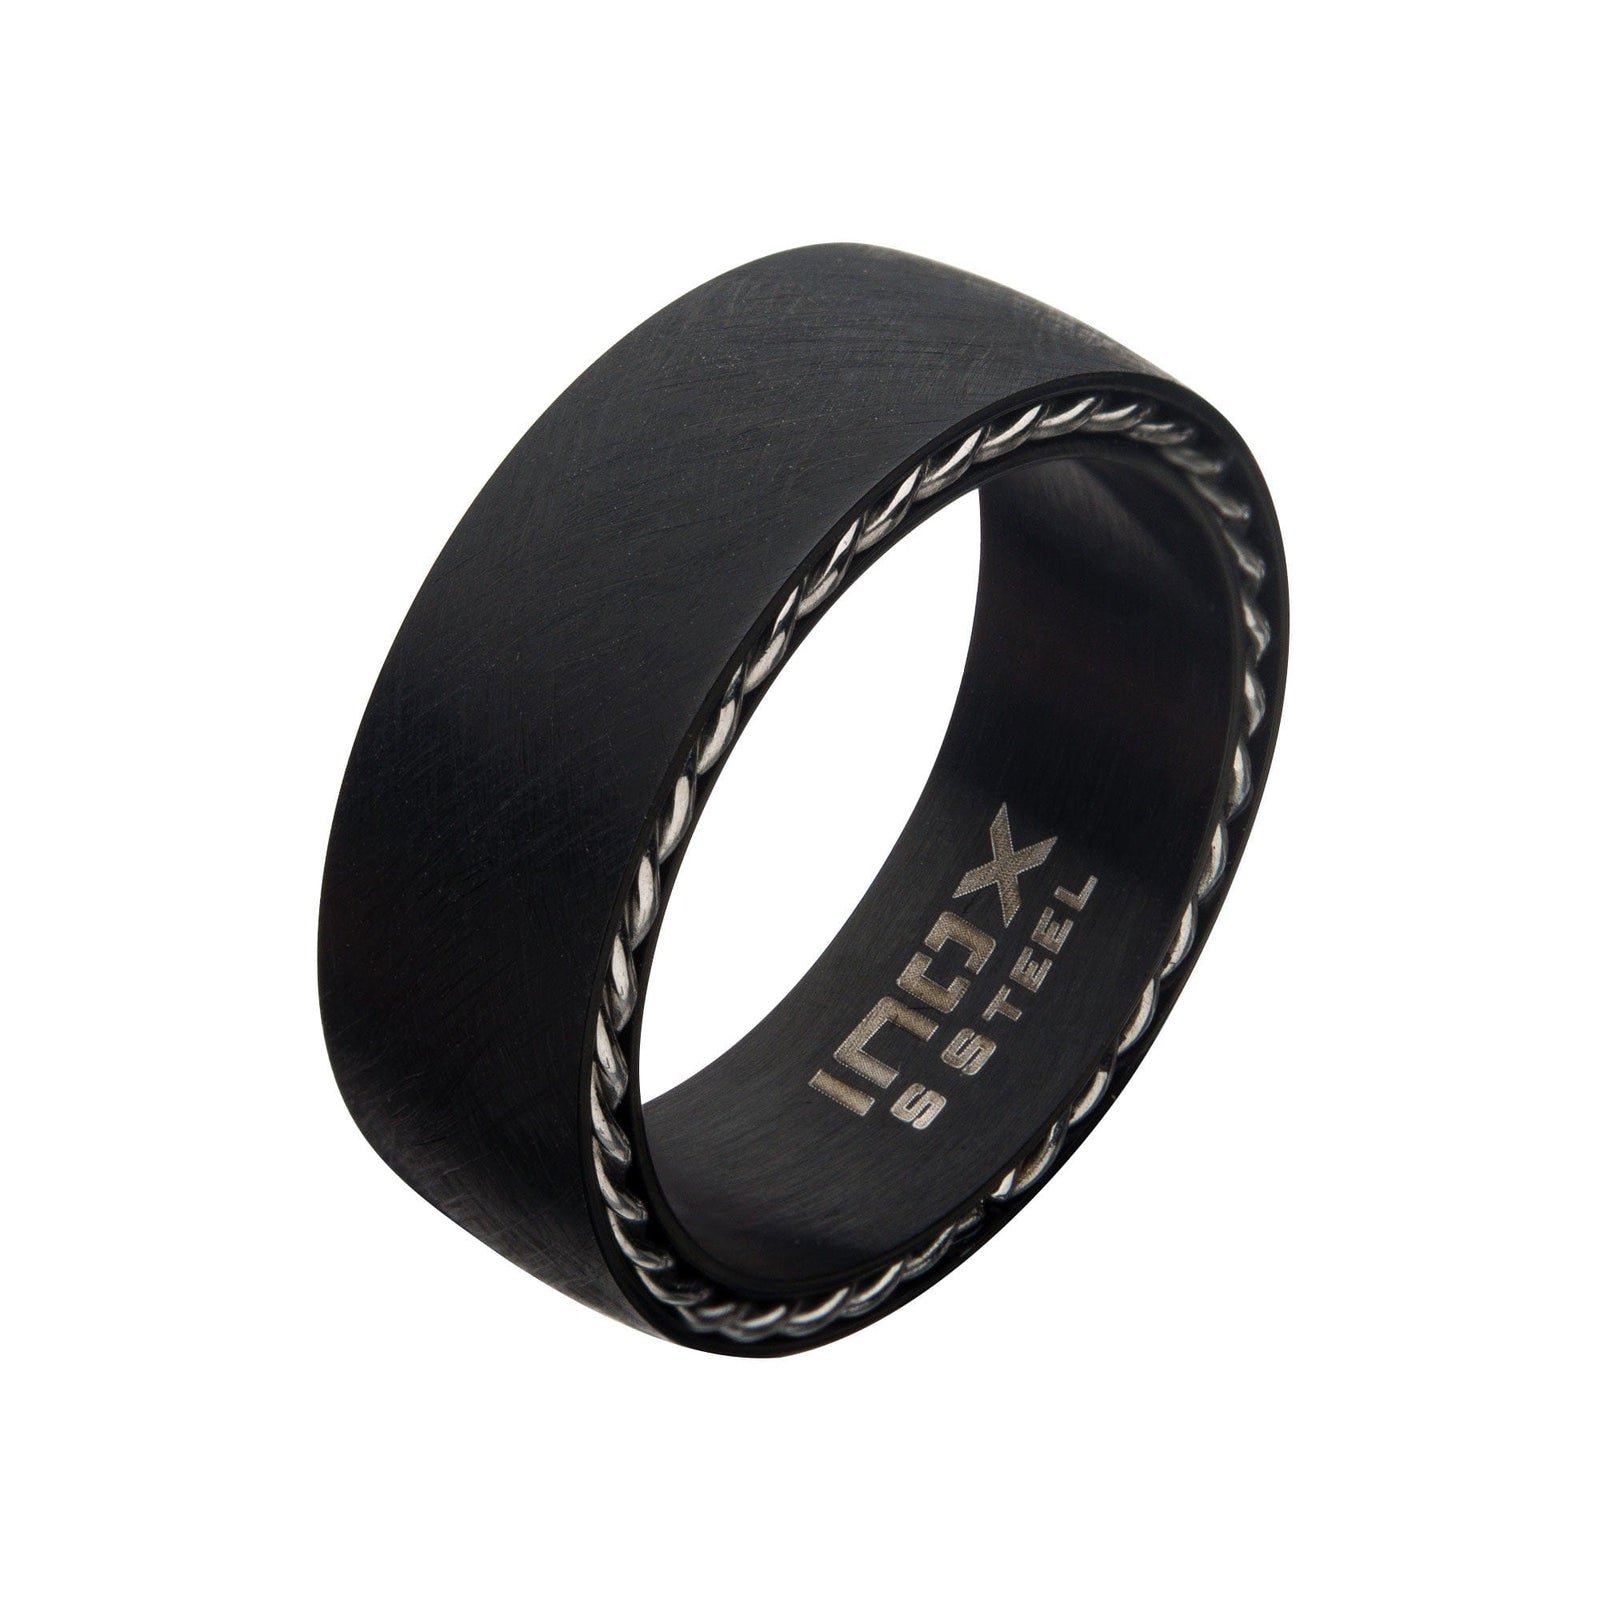 INOX JEWELRY Rings Black Stainless Steel Sand Finish Carbon Fiber and Cable Twisted Band